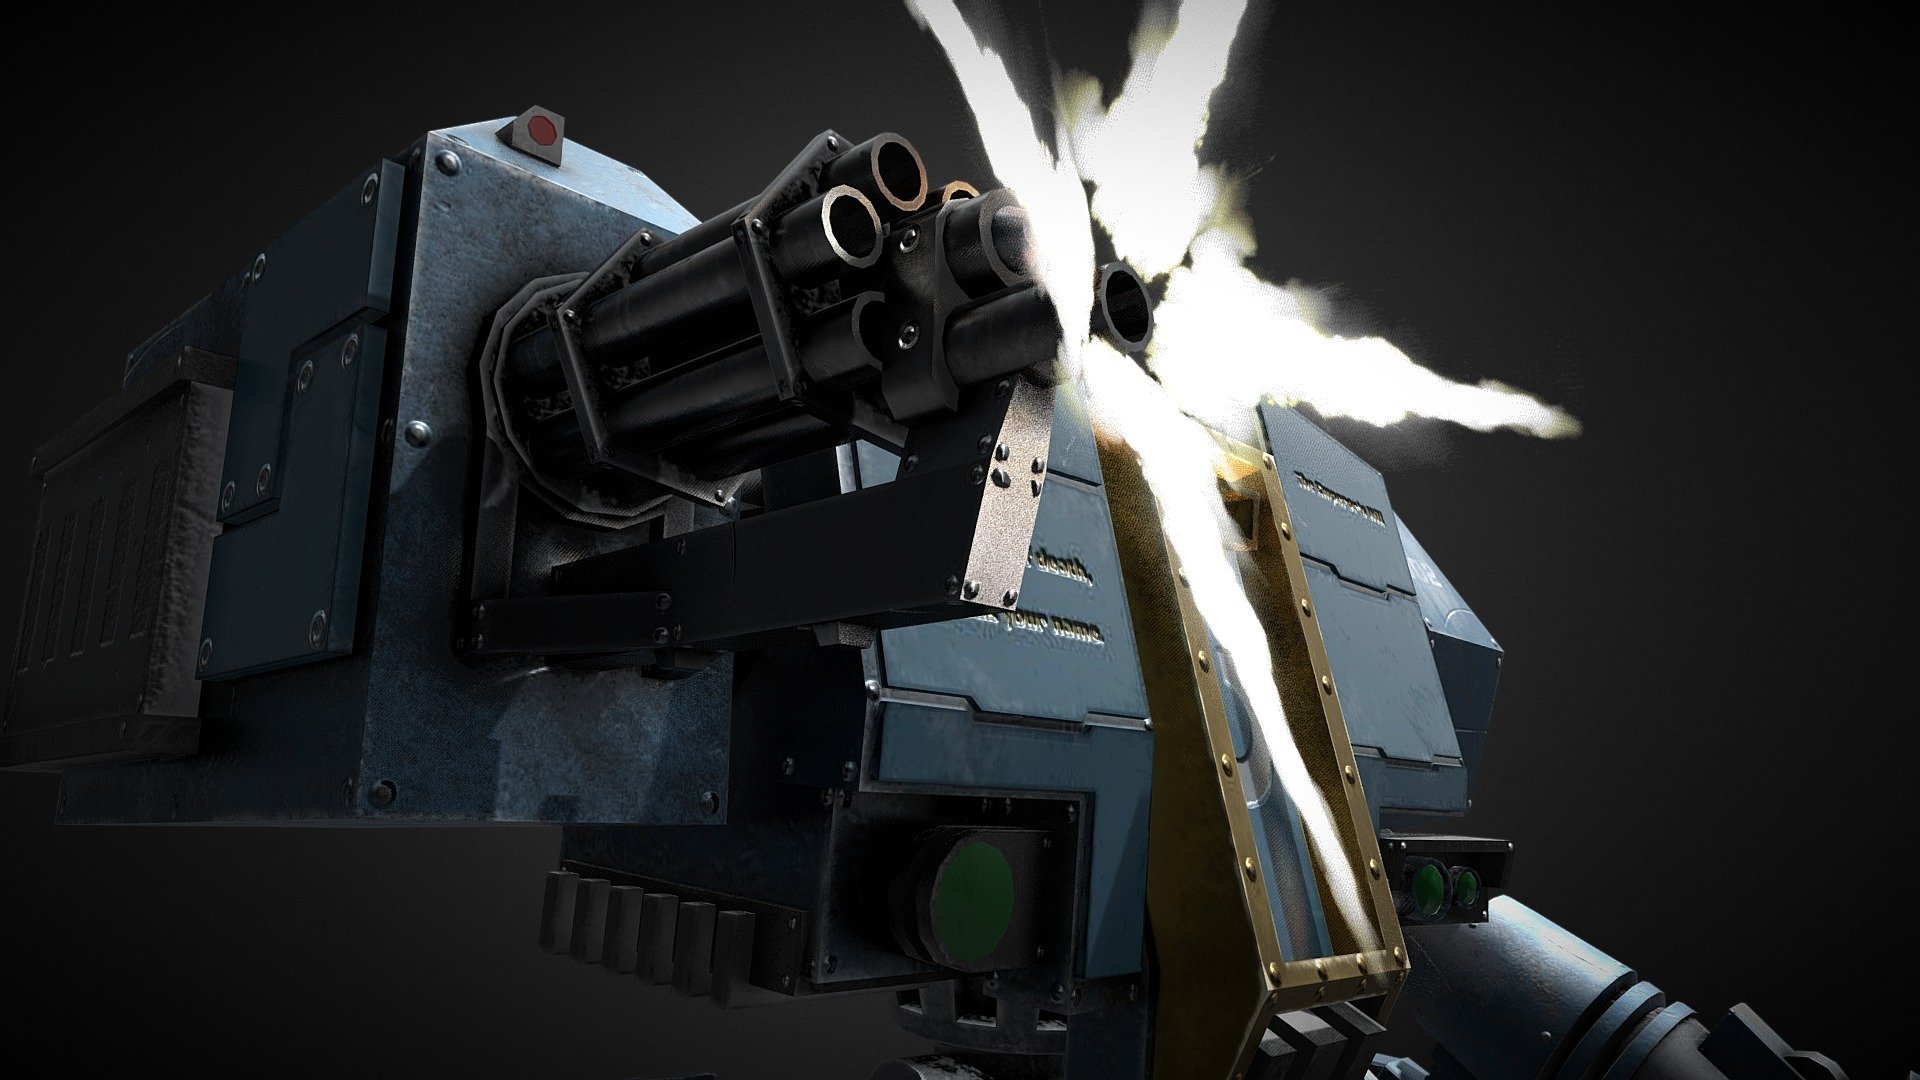 Edit: It IS RIGGED, but sketchfab is weird about it, evidence by the animation we provided.

This Dreadnought is a collaboration effort of our staff Mr.Chiang and Mr. Chuh Hsien.

This amazing model comes with a maya file which texture is already implemented. It also comes with Animschool panel controller support. 

The Leg is joint-rigged while the body is rigged individually. Allow for complex movement such as demonstrated.

We really hope you enjoy what we've brought!

Visit our facebook page at:

https://www.facebook.com/litchi.jp/

Our Work at Youtube:

https://www.youtube.com/channel/UCAdUh9xXgG-yH4I4eVbFx1w?view_as=subscriber - Dreadnought Walker Rigged - Buy Royalty Free 3D model by Armored Interactive (@ychiang6) 3d model